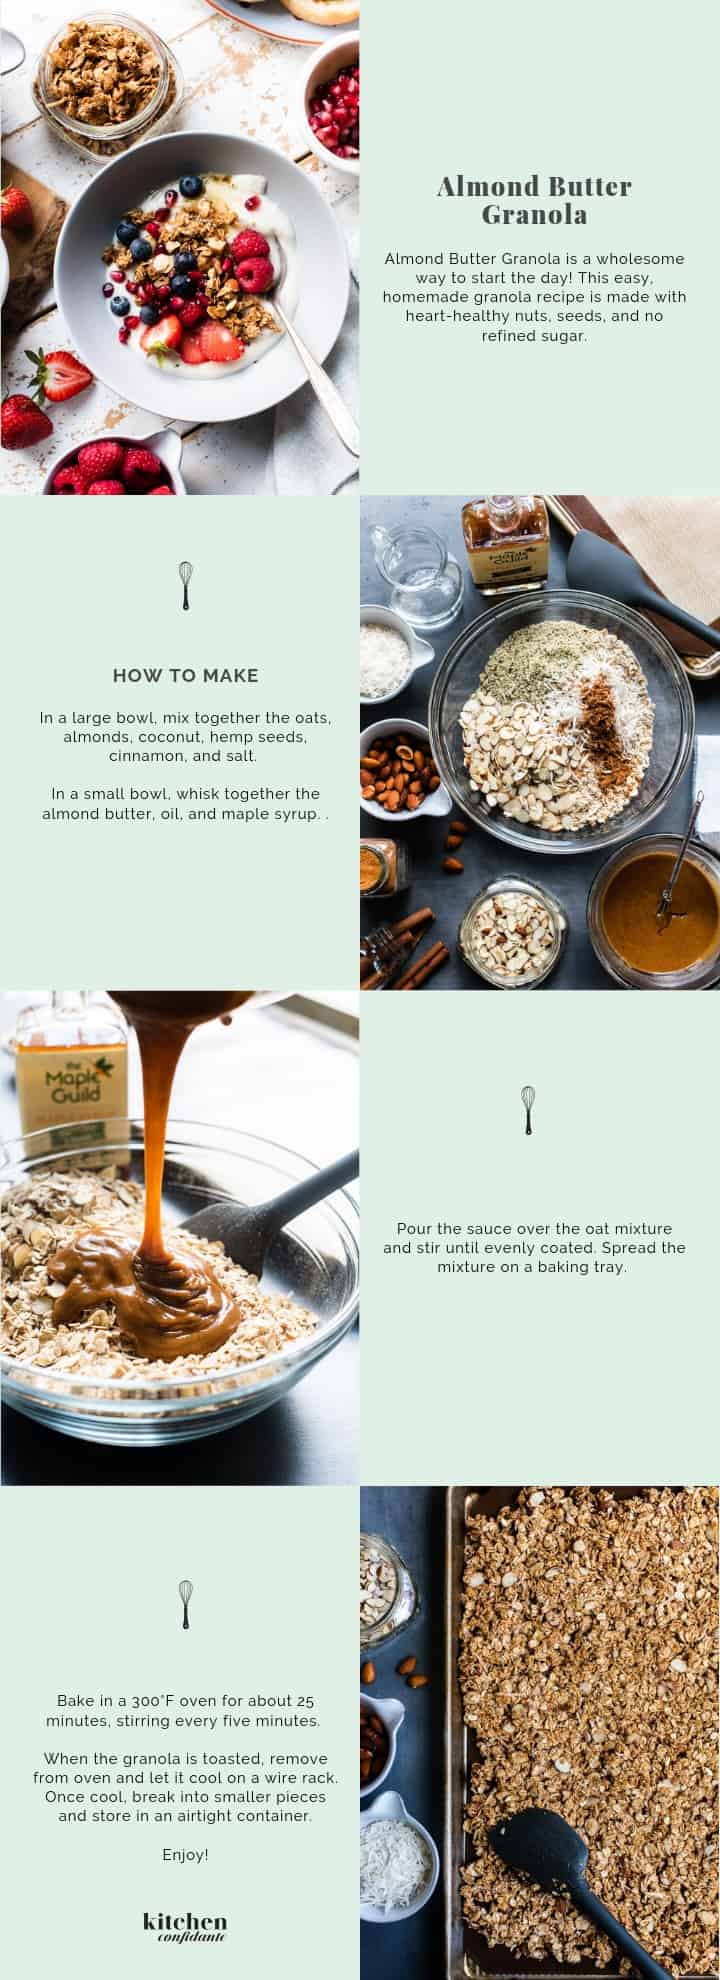 How to make homemade almond butter granola collage with instructions.